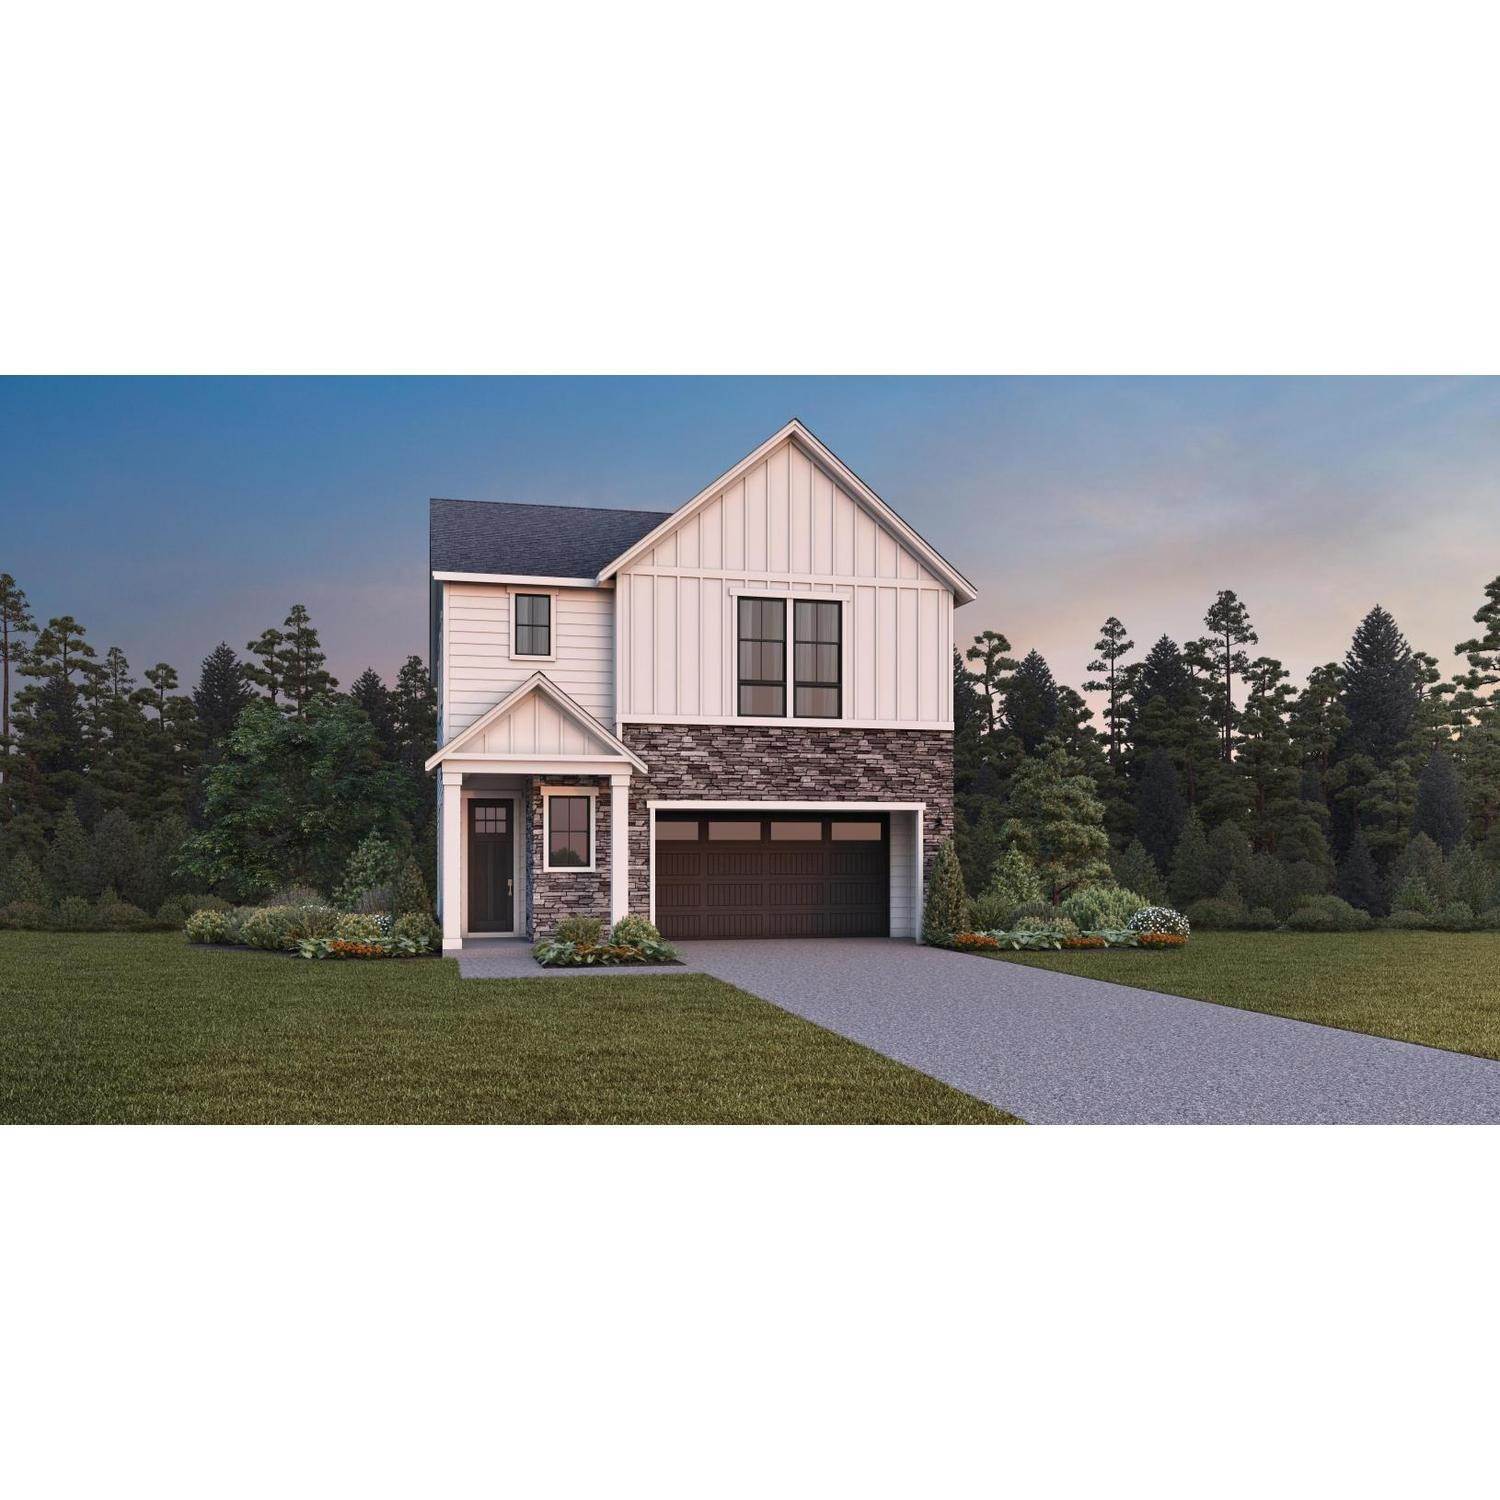 Toll Brothers at Hosford Farms - Terra Collection building at 15789 NW Holman Way, Portland, OR 97229